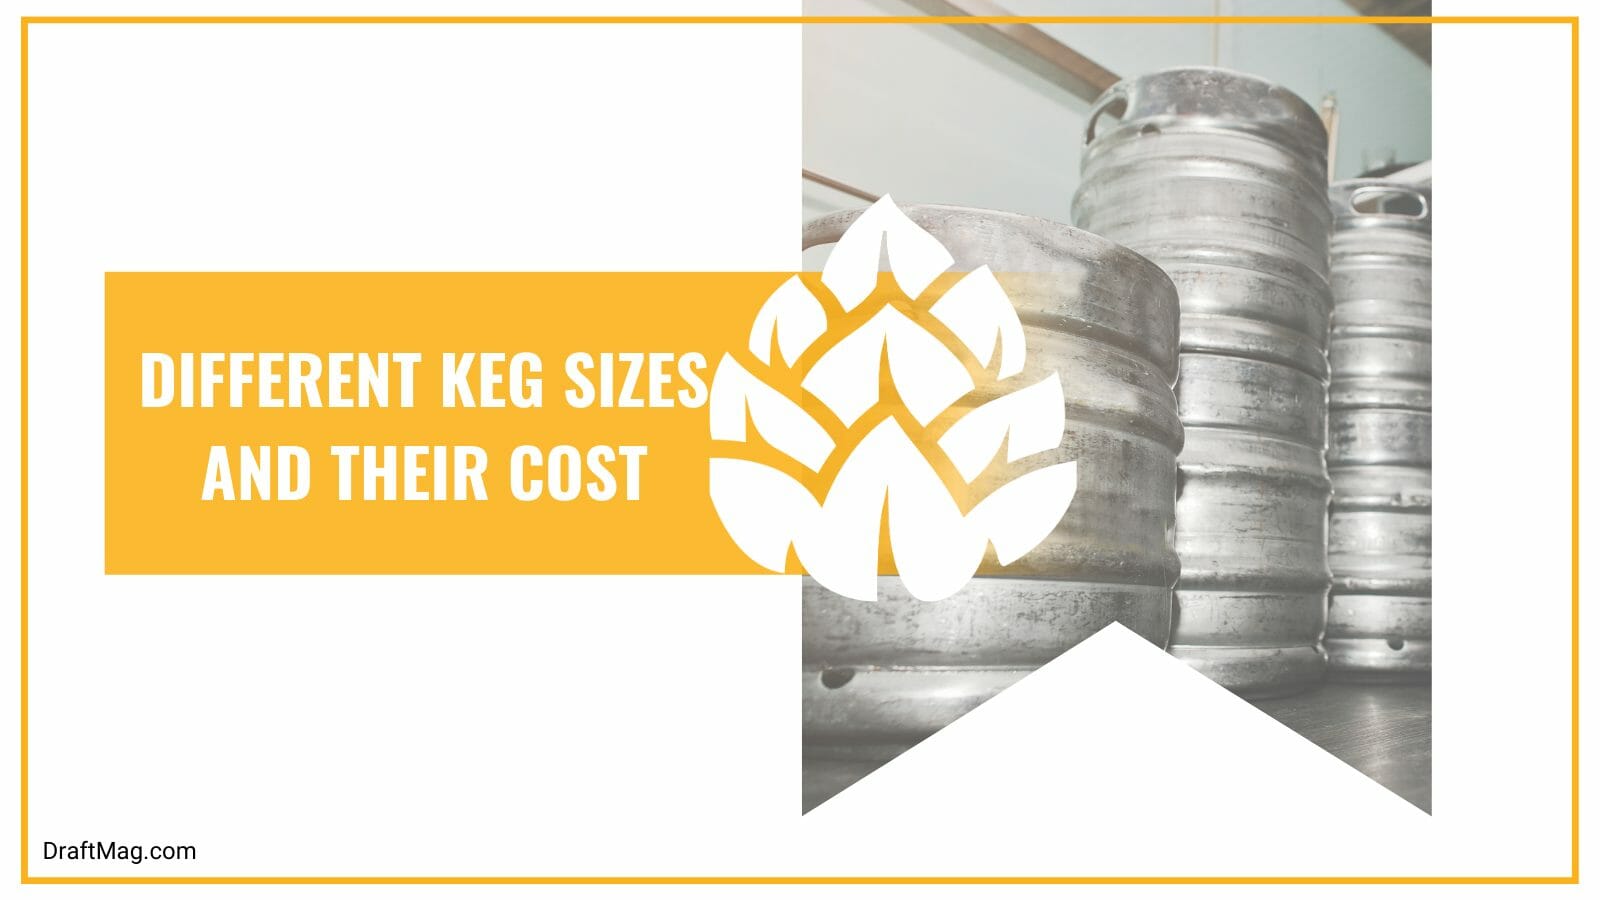 Different keg sizes and prices